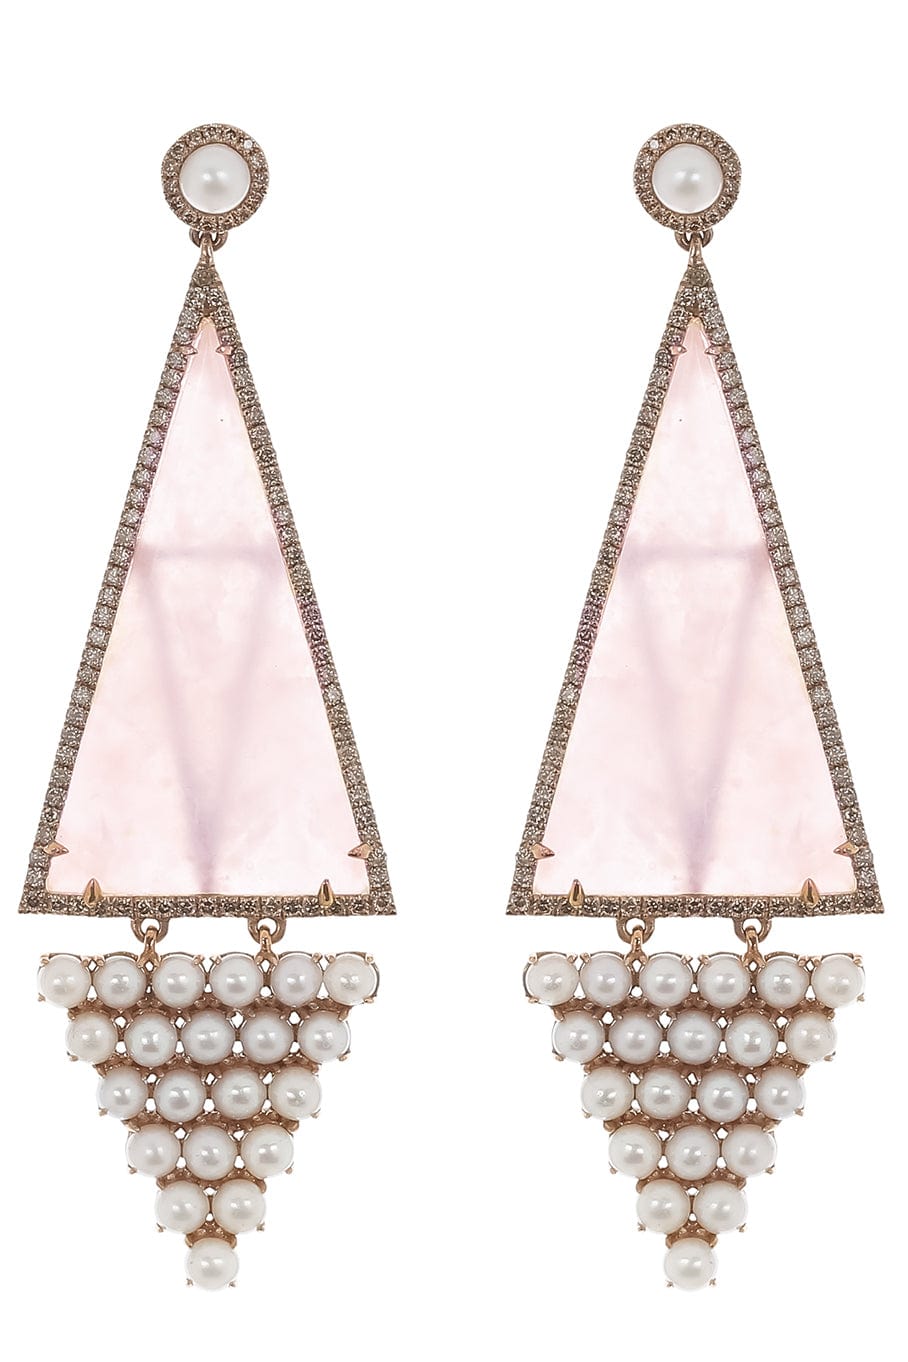 WENDY YUE-Pearl and Opal Triangle Earrings-ROSE GOLD